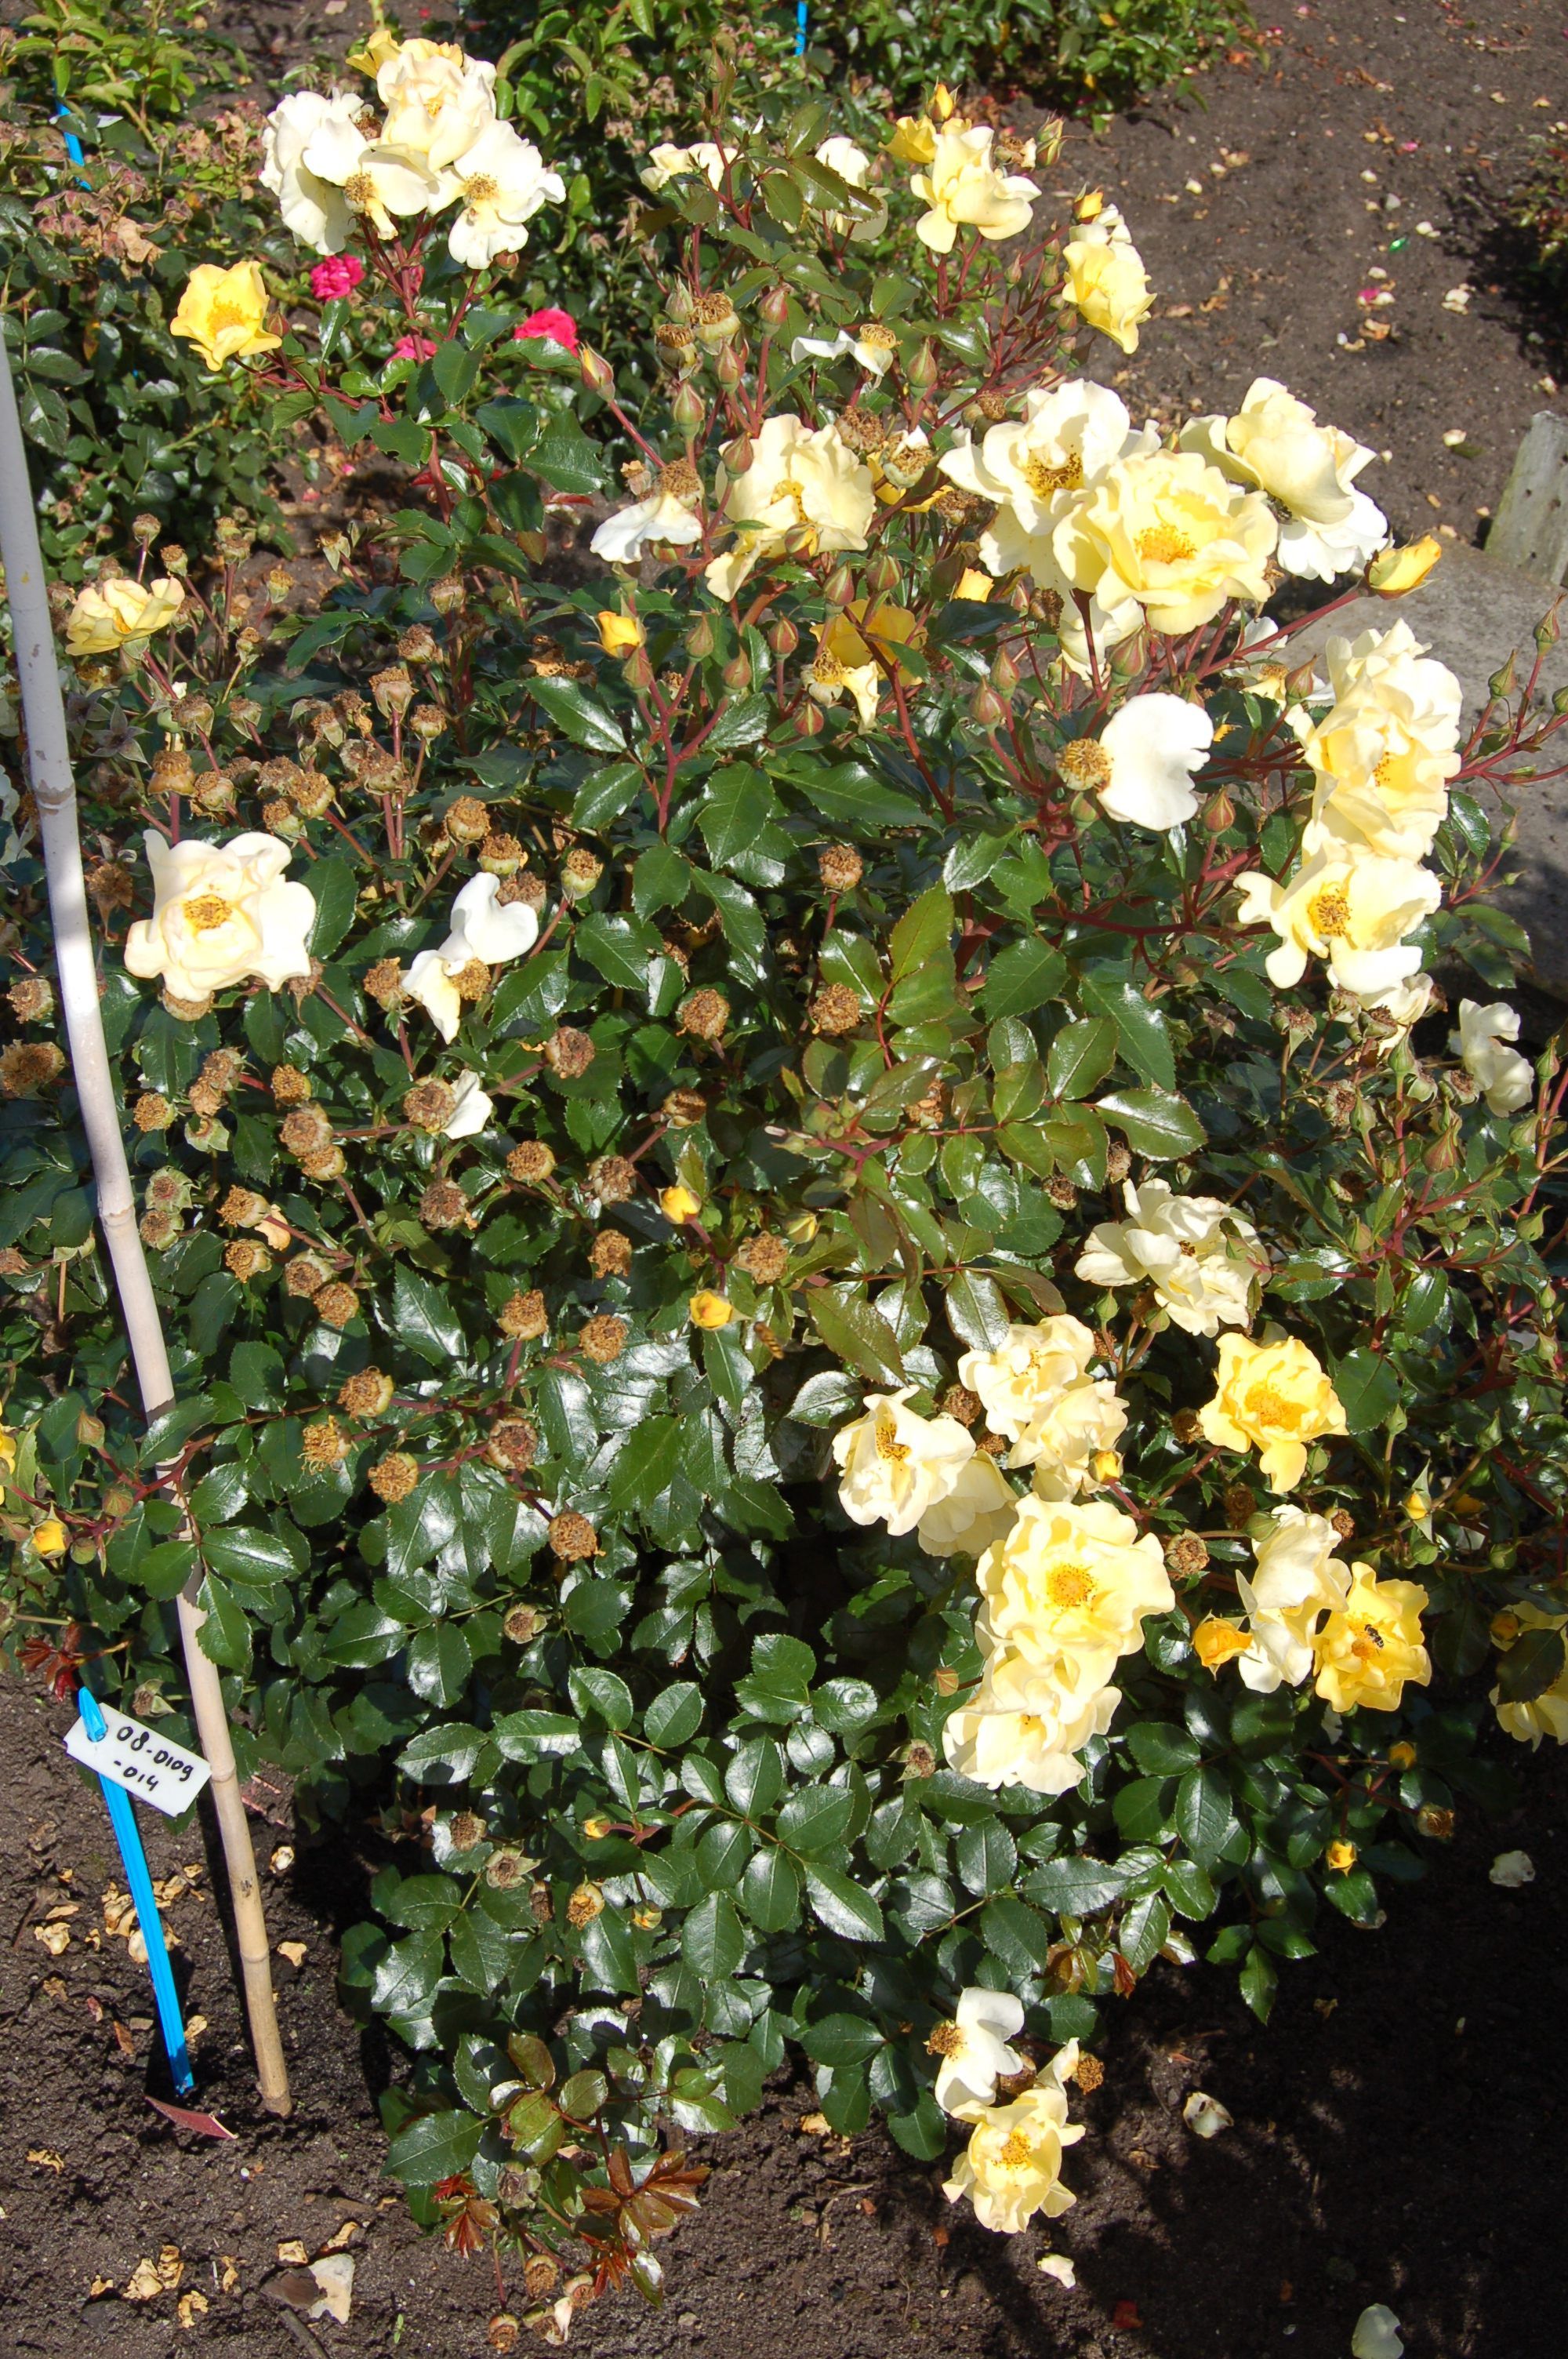 images/plants/rosa/ros-nitty-gritty-yellow/ros-nitty-gritty-yellow-0002.jpg